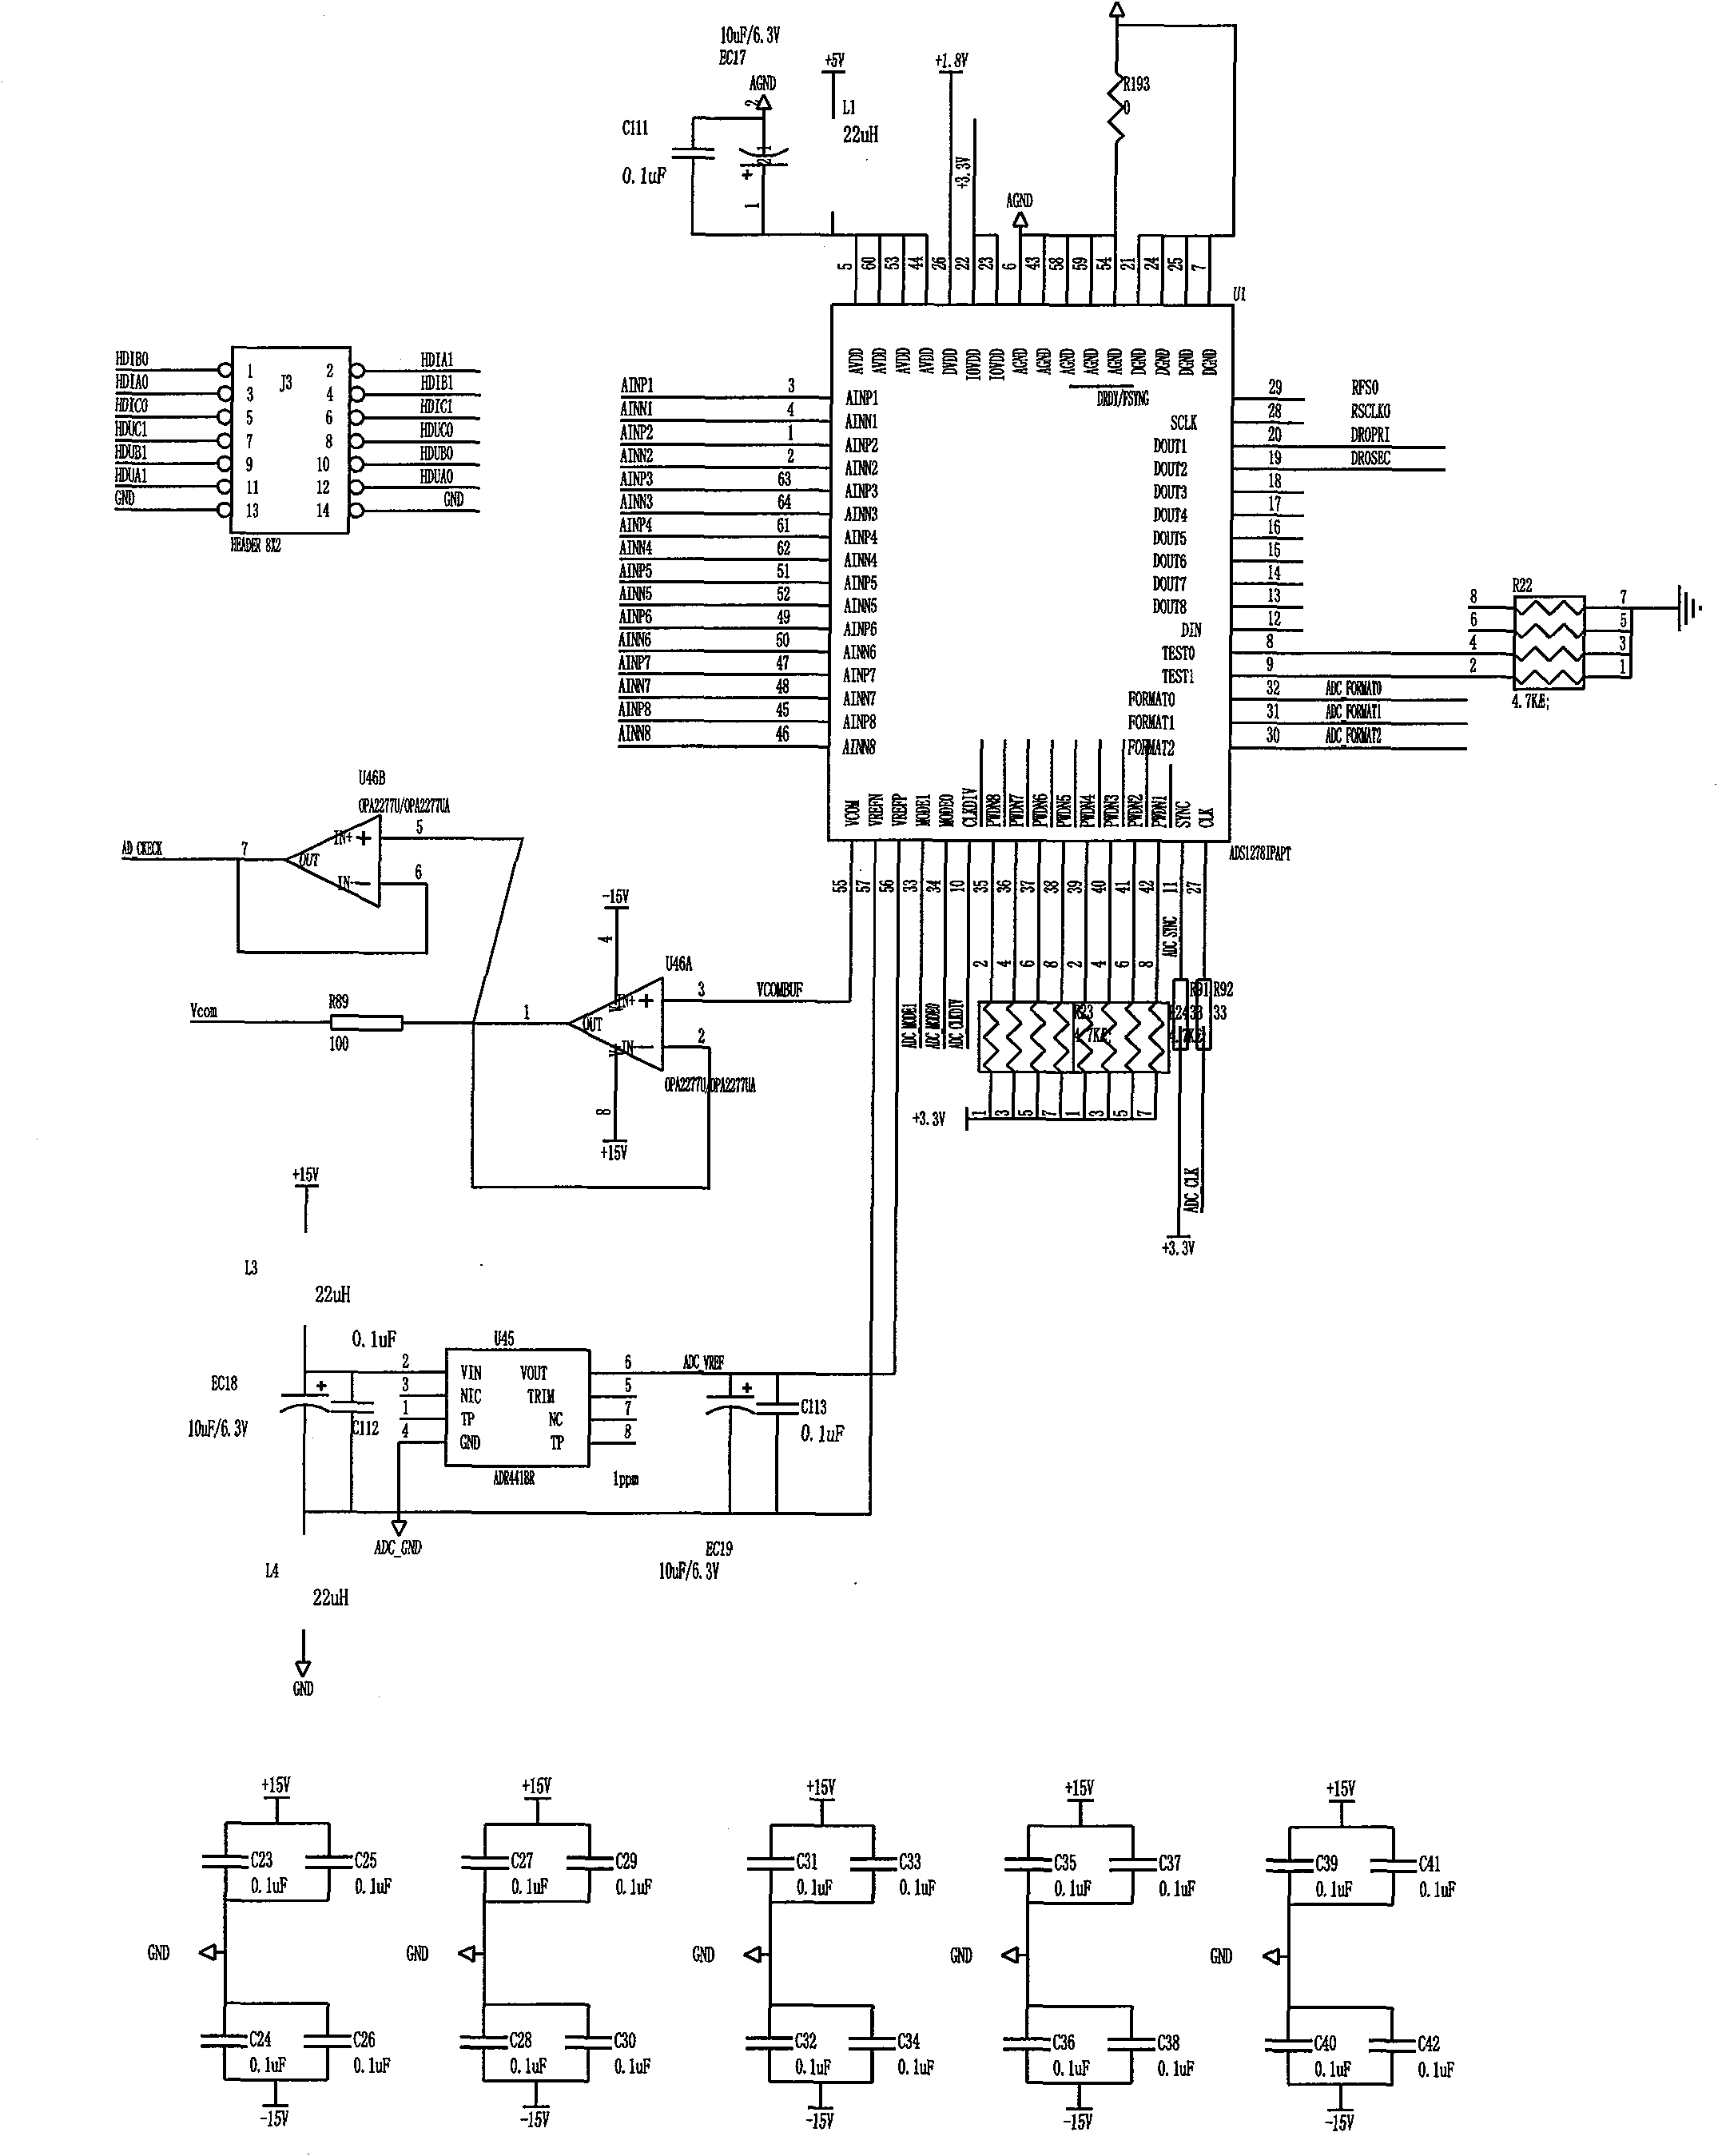 Digital electric energy meter checking device based on analog source tracing method